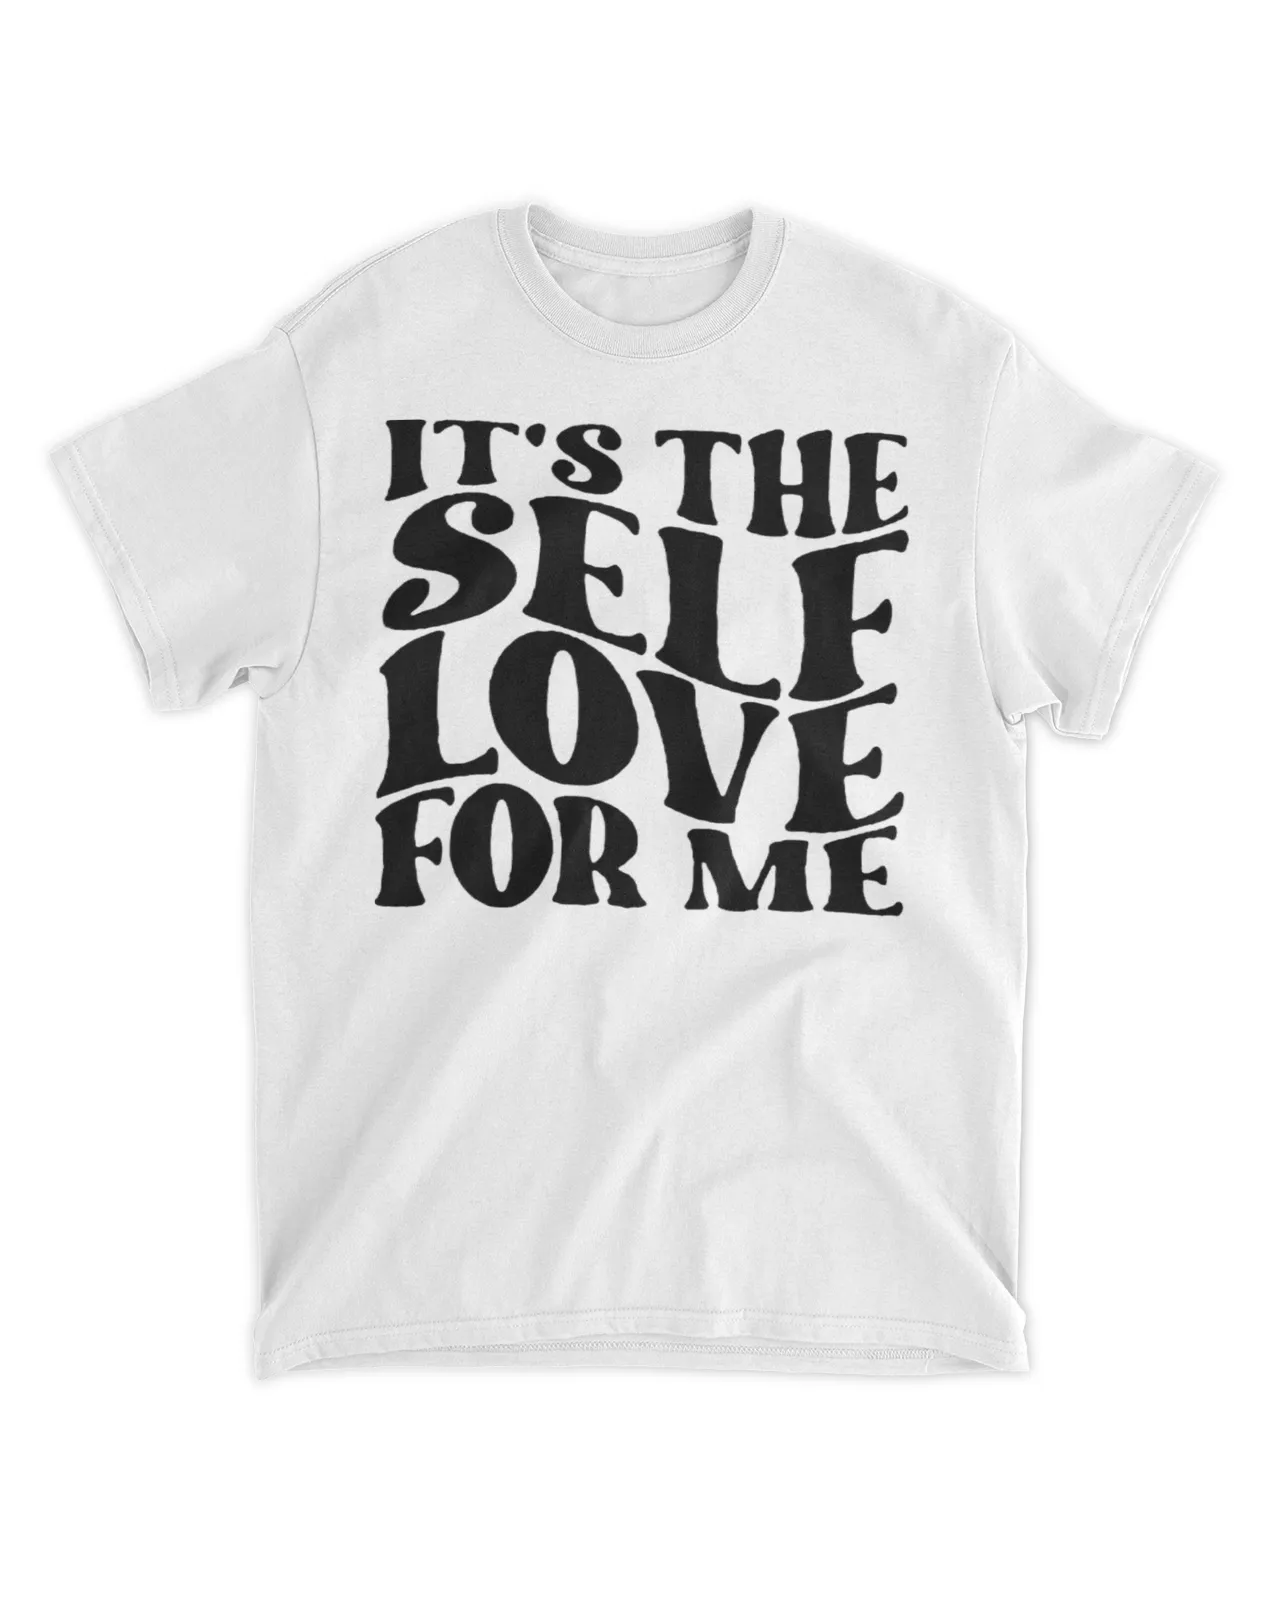  It's the self love for me shirt